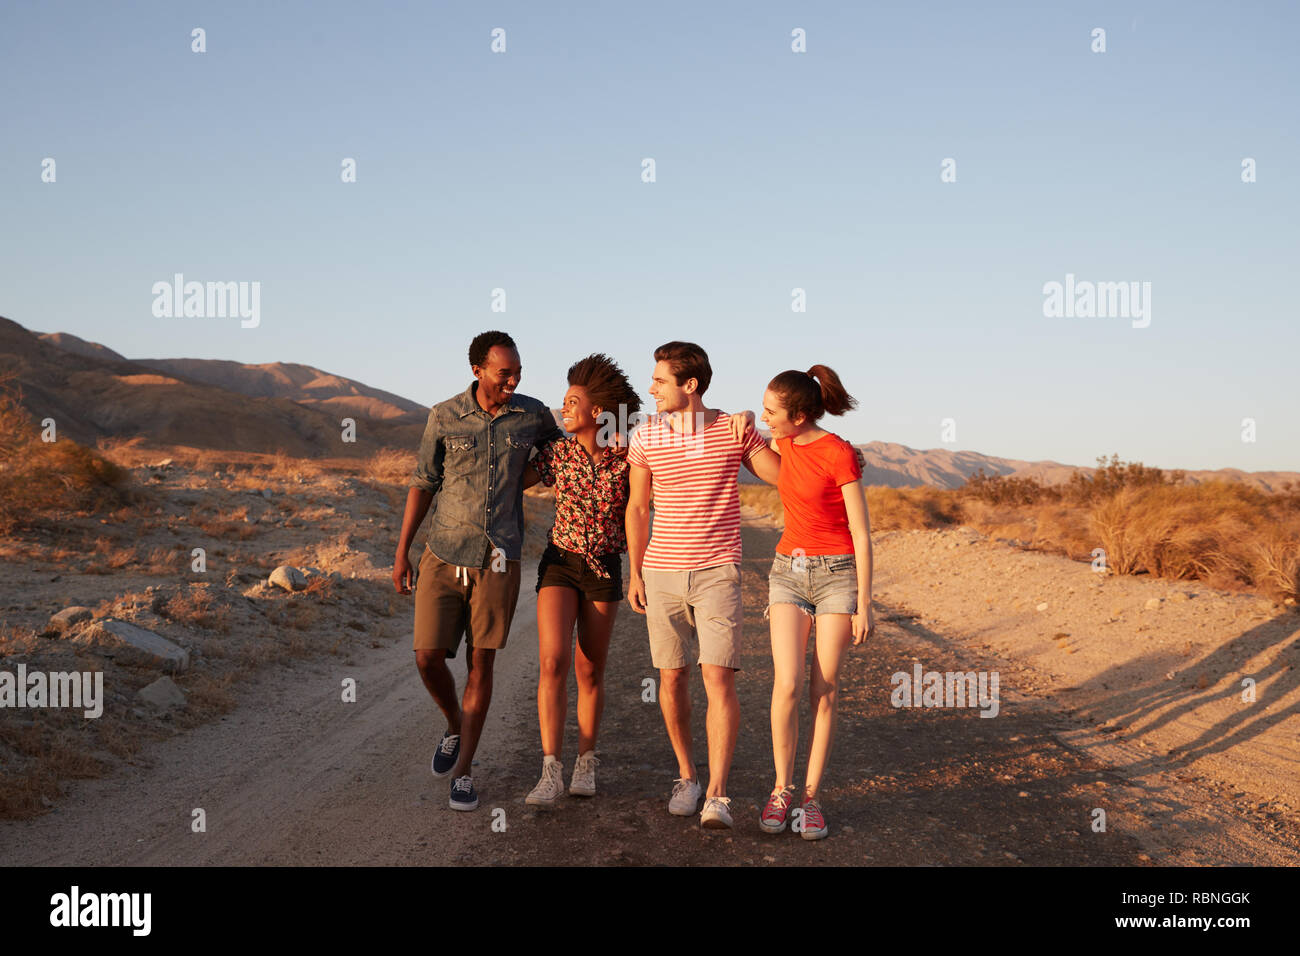 Two young adult couples walking on a desert road Stock Photo